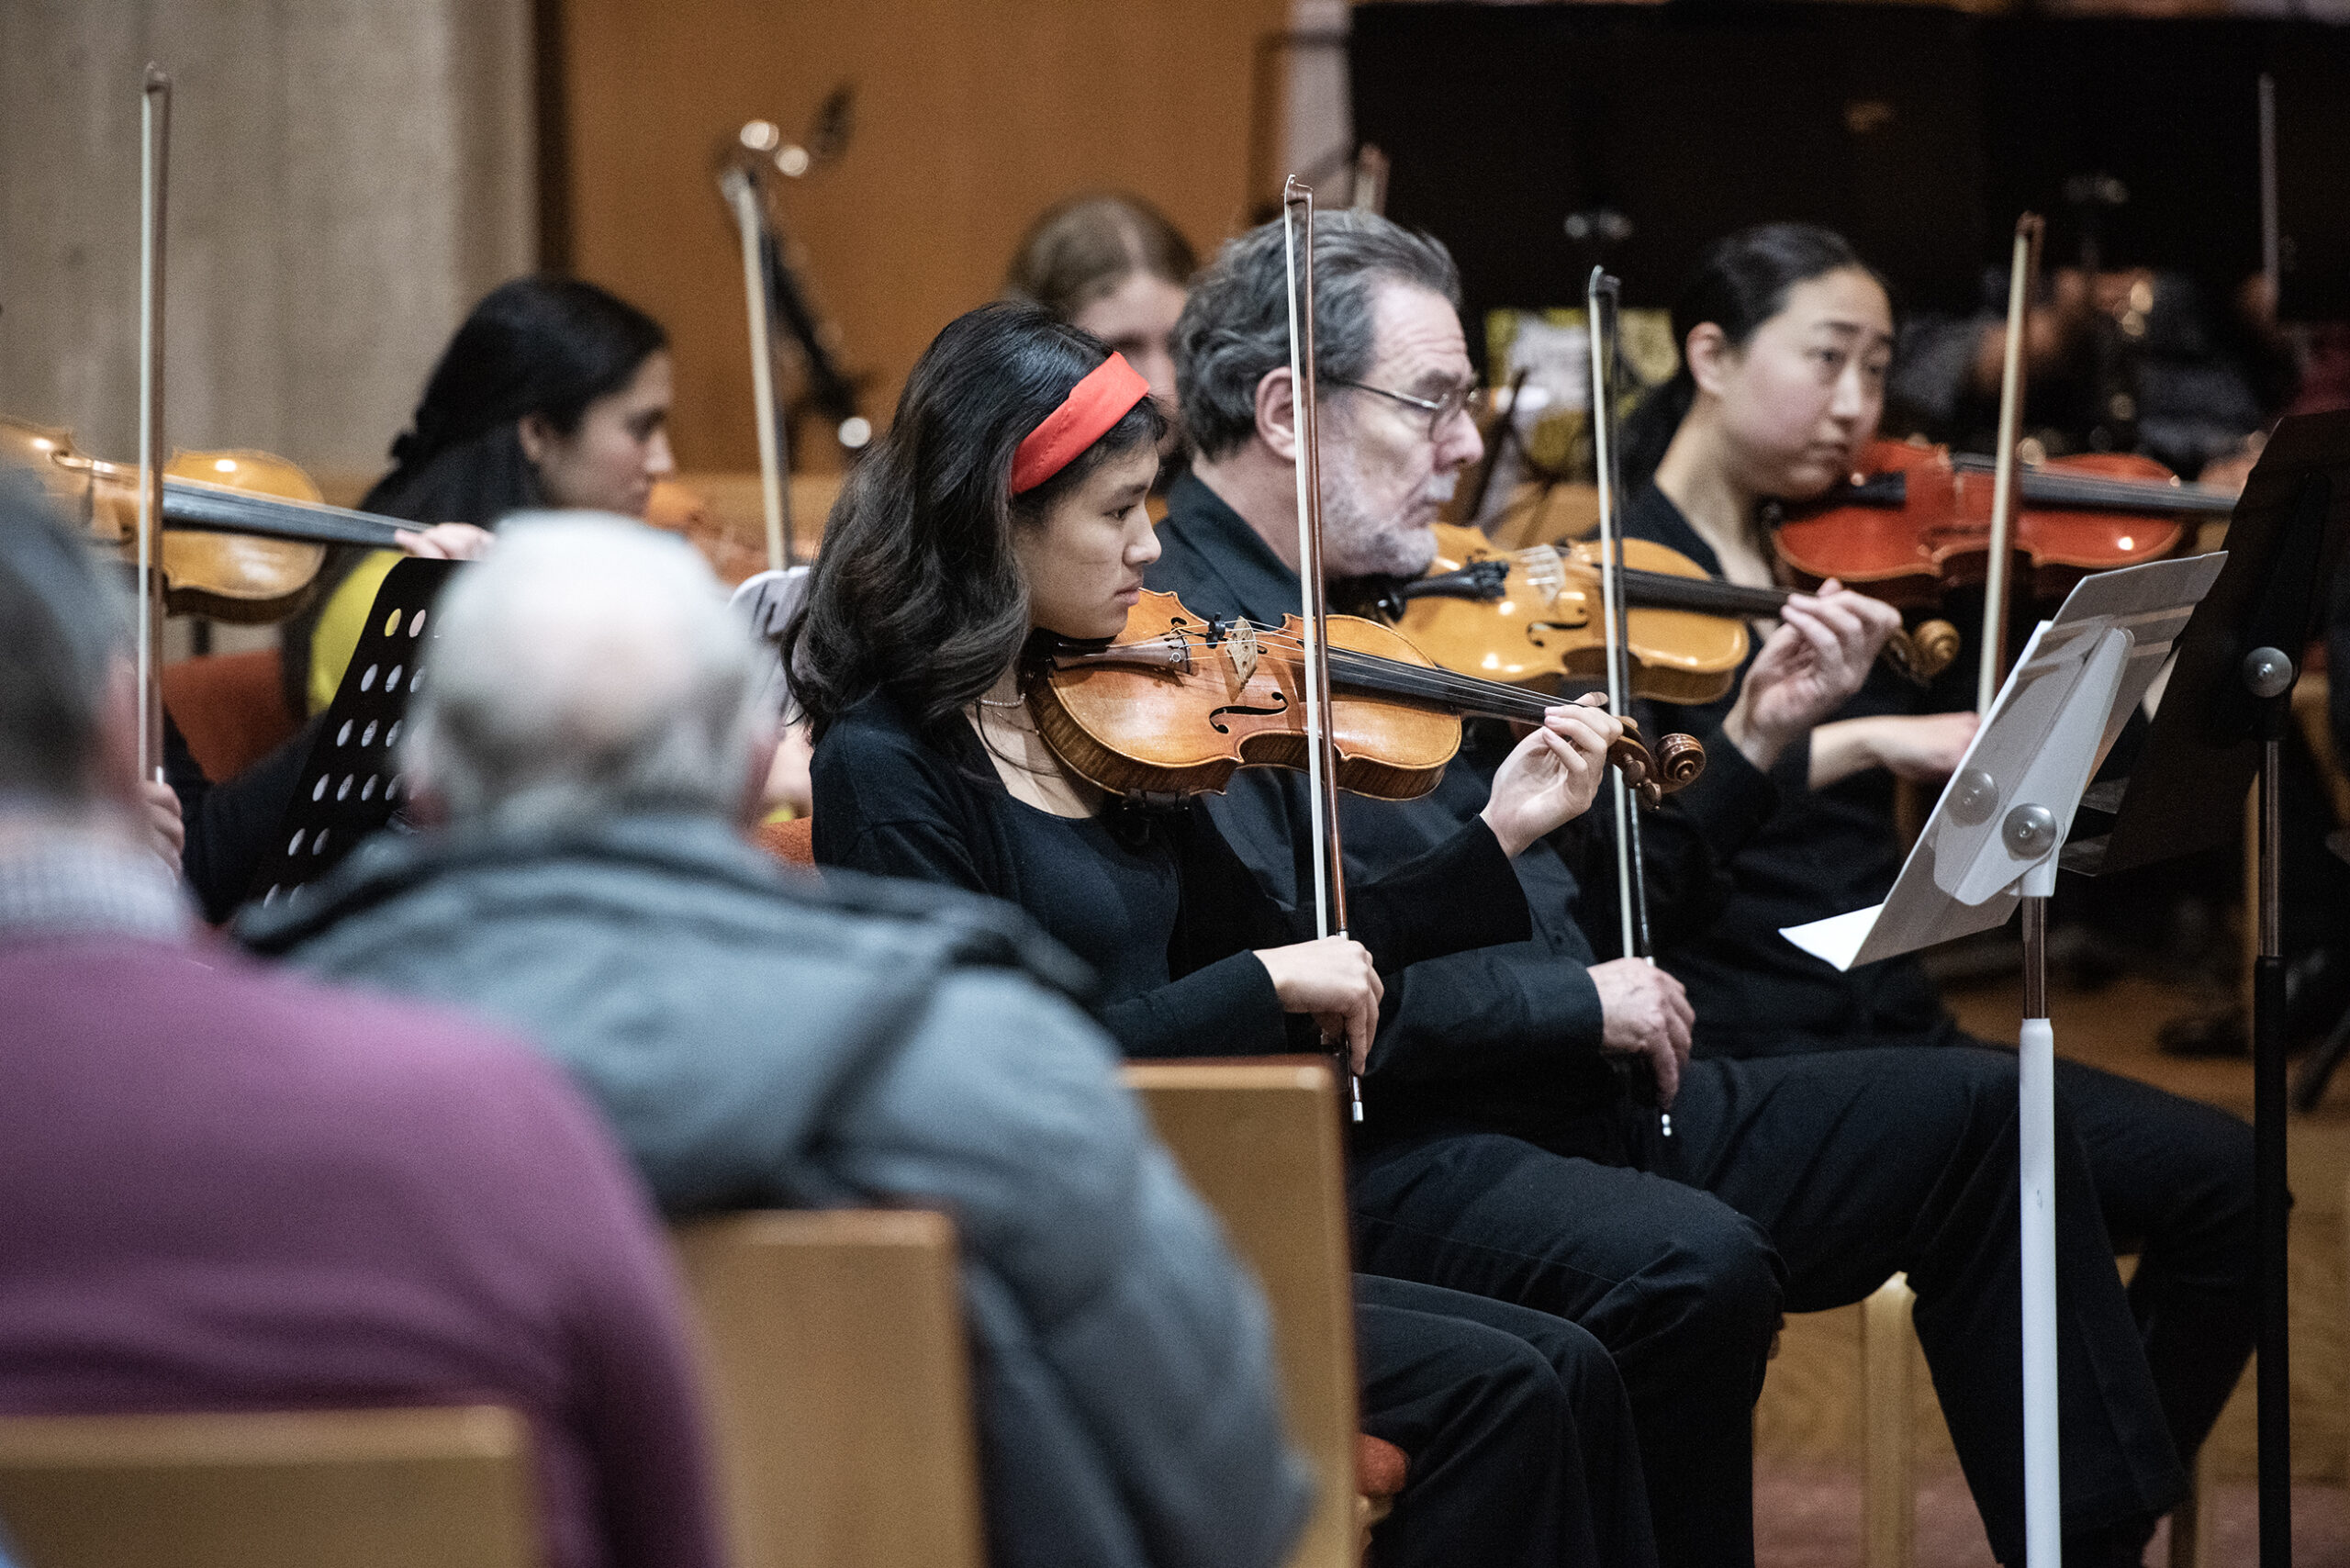 A line of violinists play music as an audience watches from church pews.